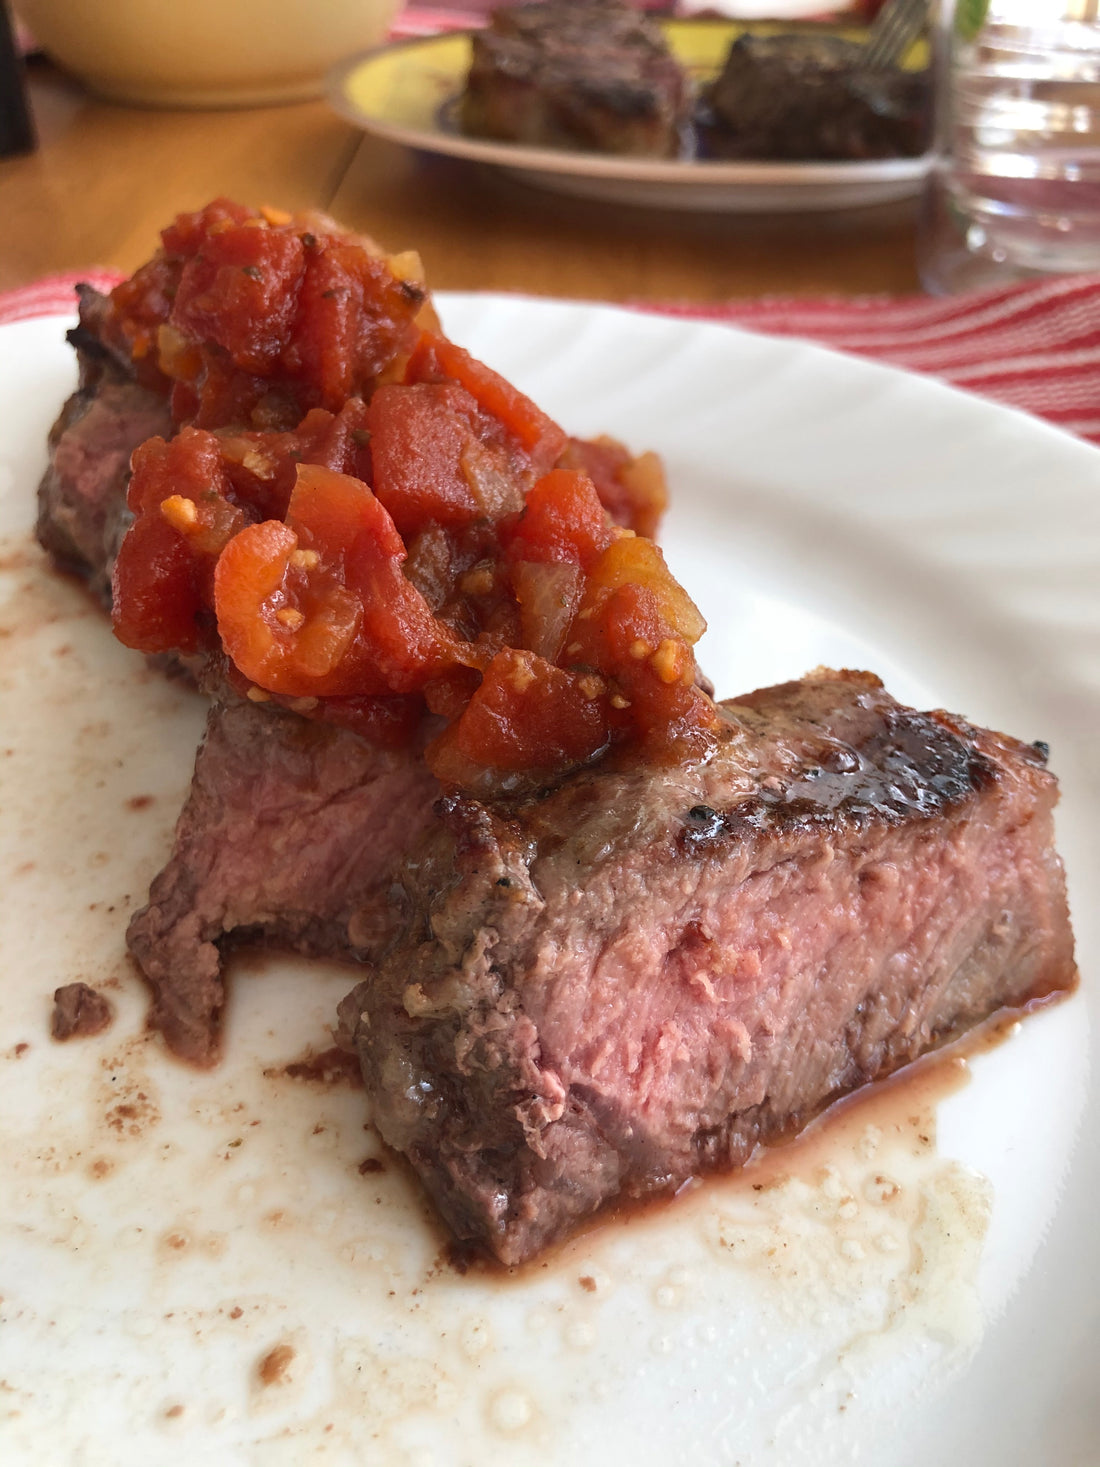 Leftover Steak? Creative Recipes to Use it Up